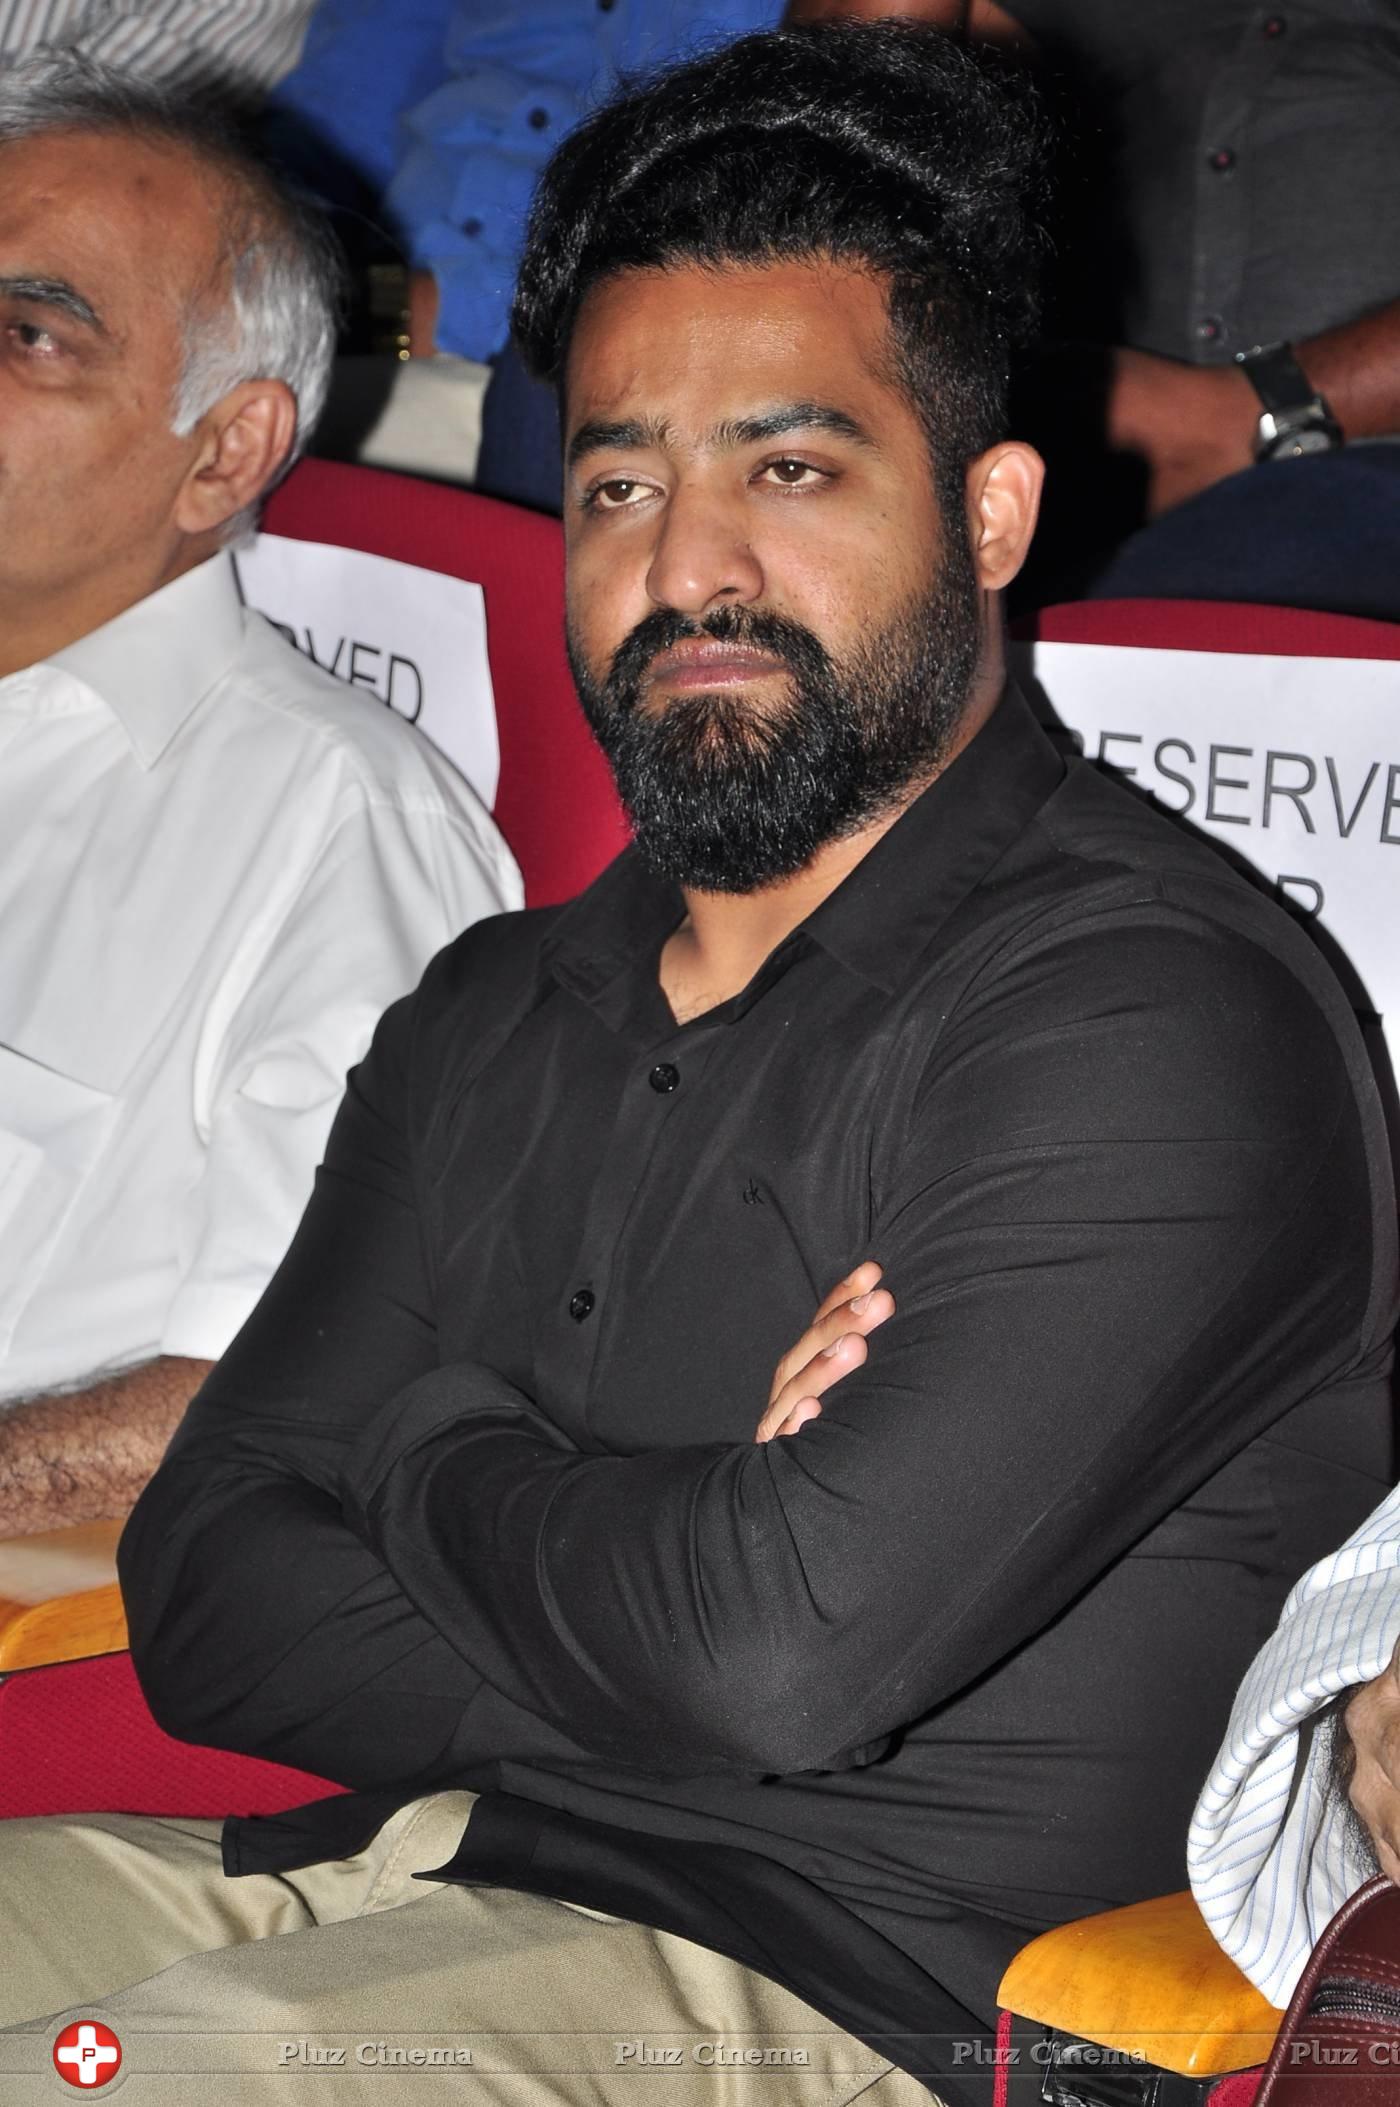 Jr NTR at Kims Acute Stroke Unit Inauguration Photos | Picture 1179255